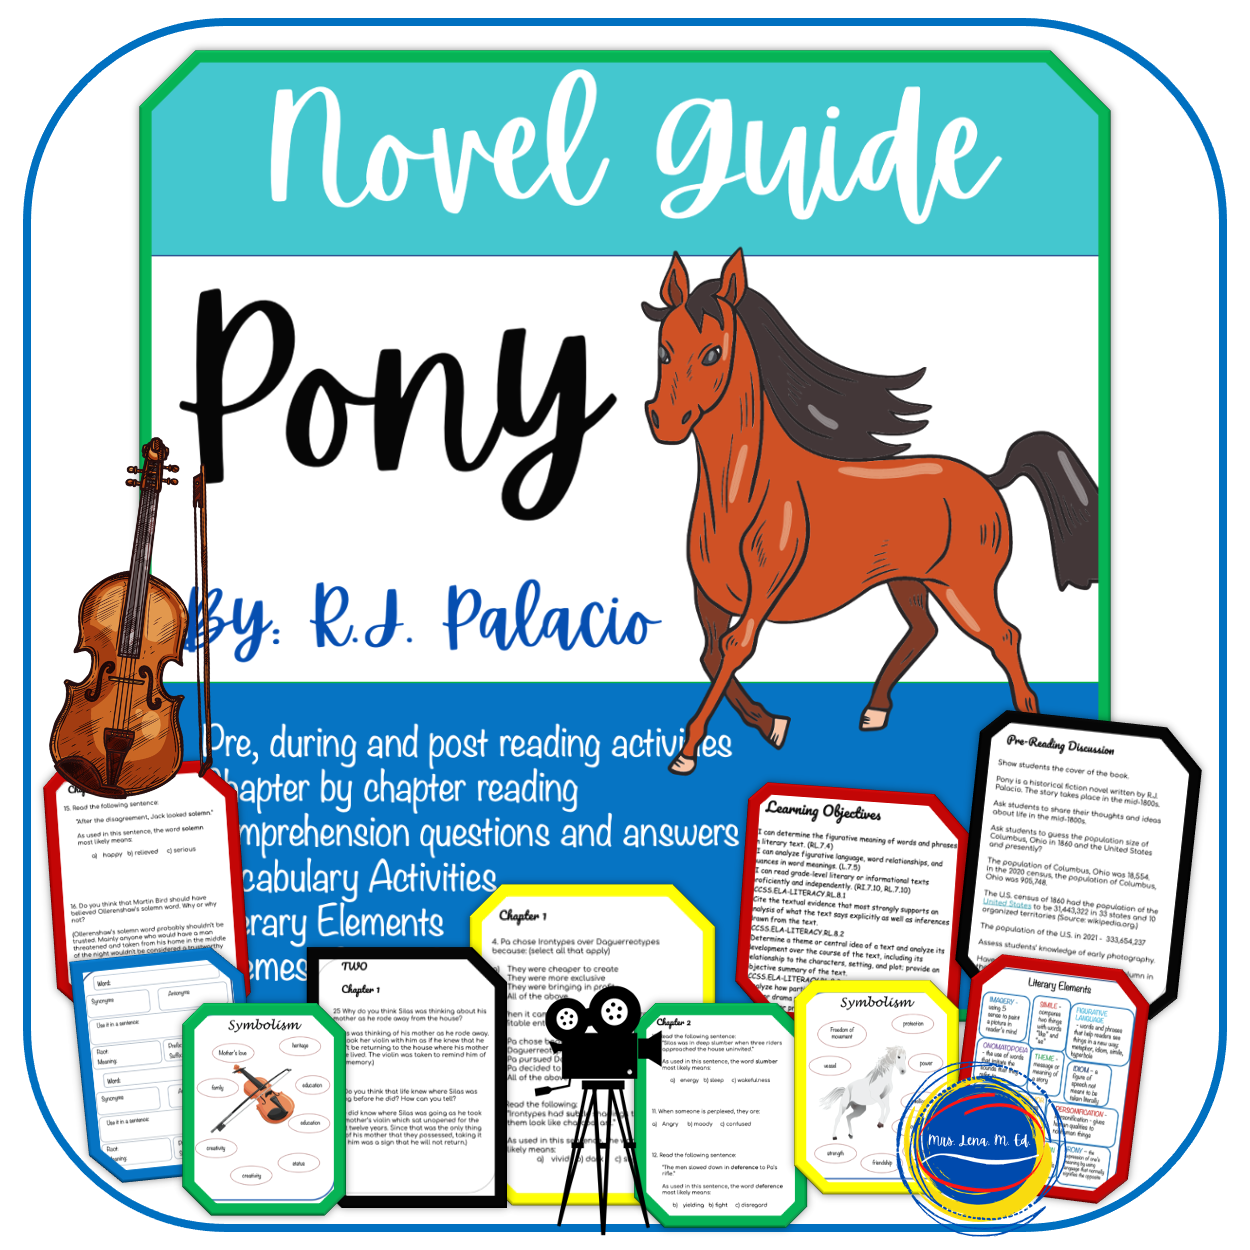 Pony by R.J. Palacio Novel Guide for one of the best new middle grade novels. This resource is perfect for teaching symbolism, character development, cause and effect, literary elements, American history, plot development, new vocabulary and MUCH MORE!